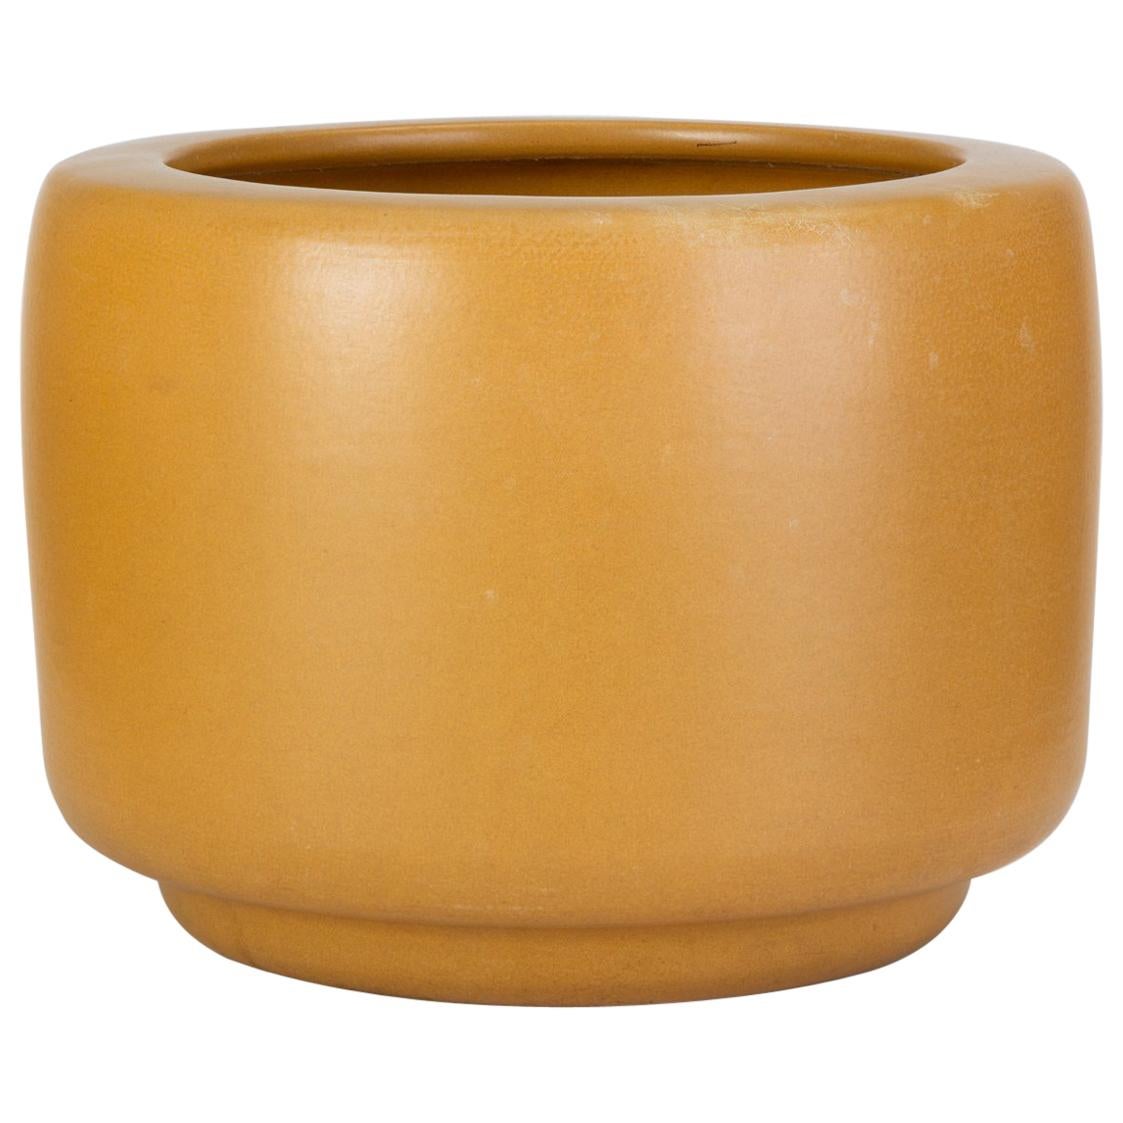 CP-13 Tire Planter by John Follis for Architectural Pottery in Yellow Glaze